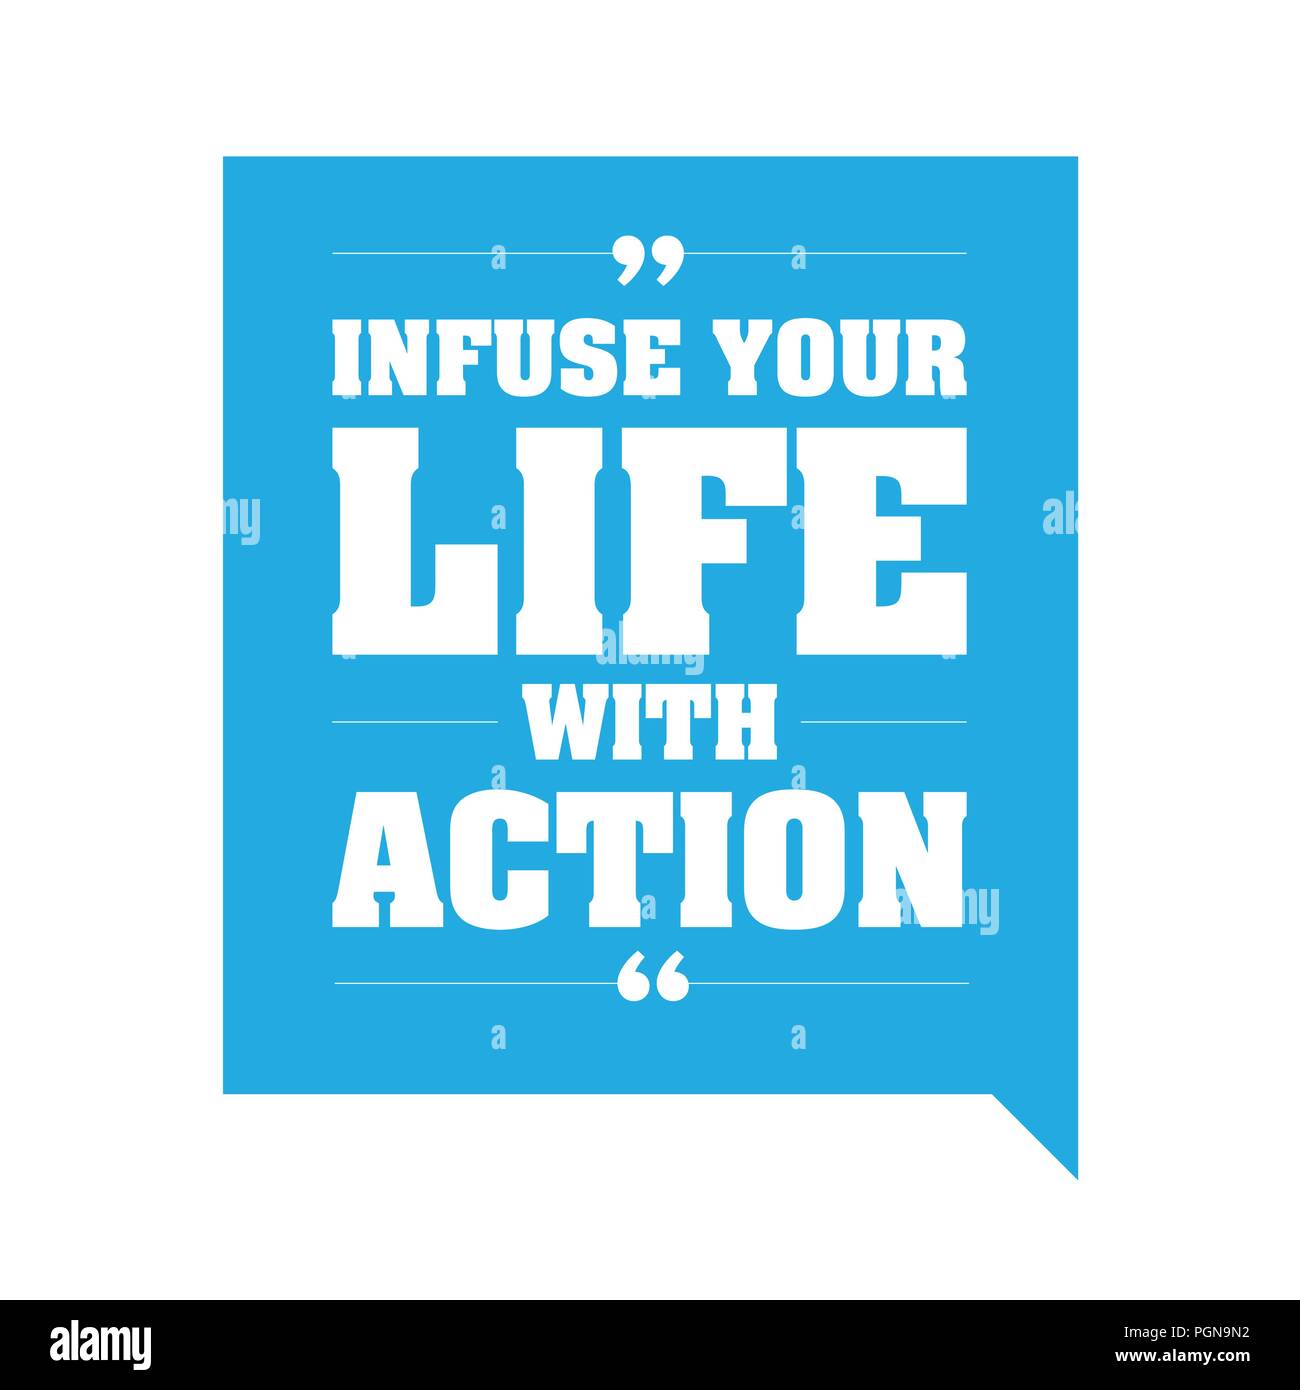 Infuse your life with action Stock Vector